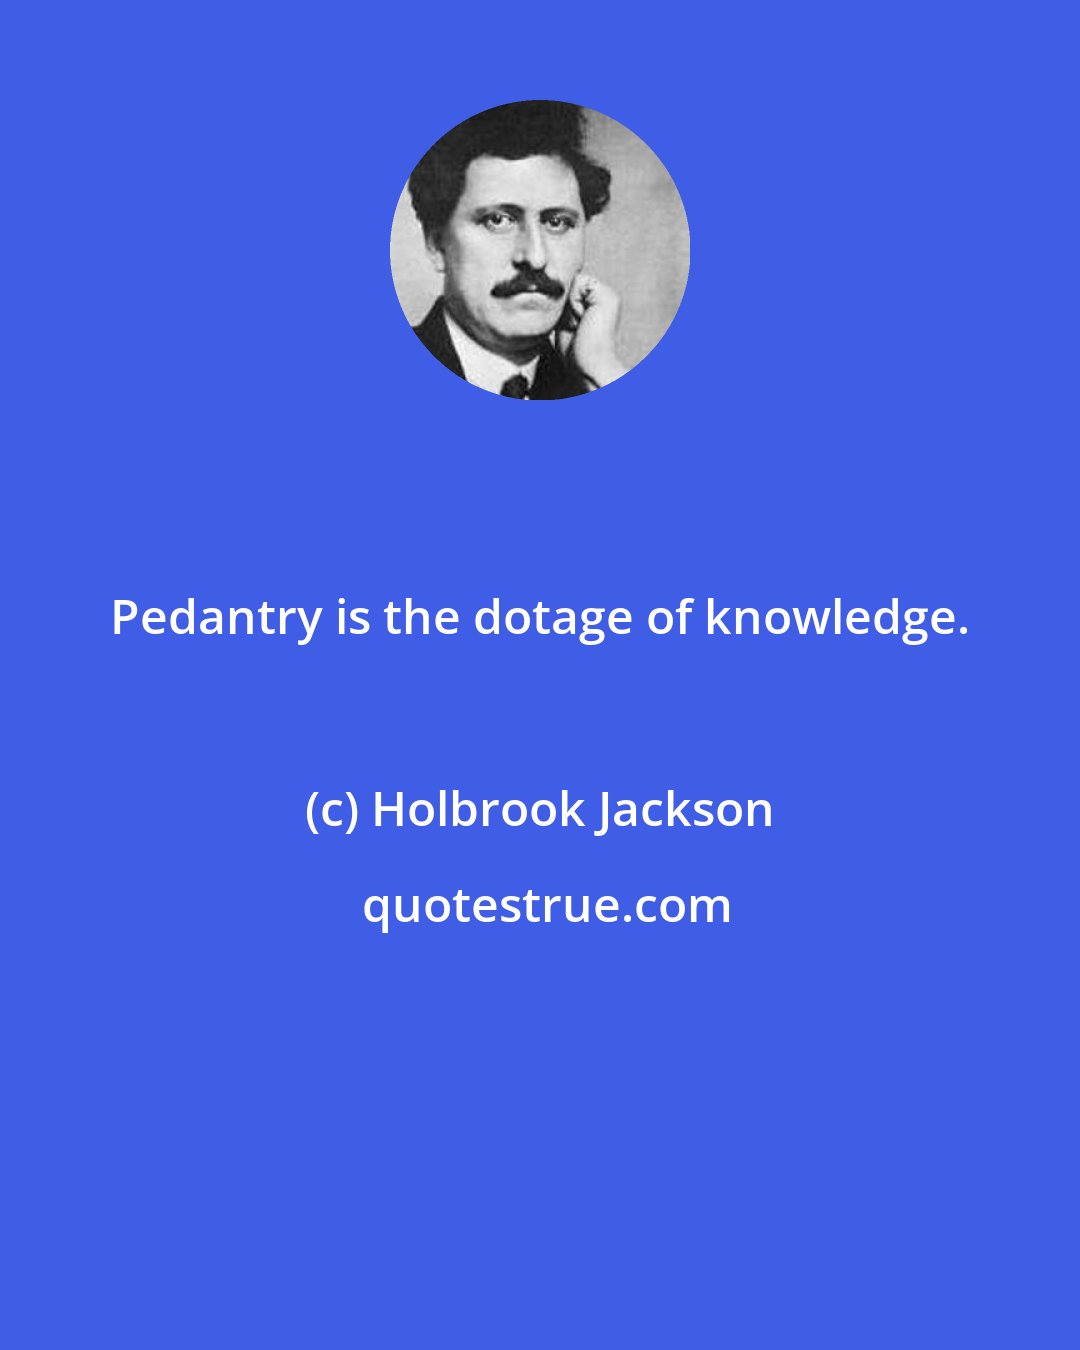 Holbrook Jackson: Pedantry is the dotage of knowledge.